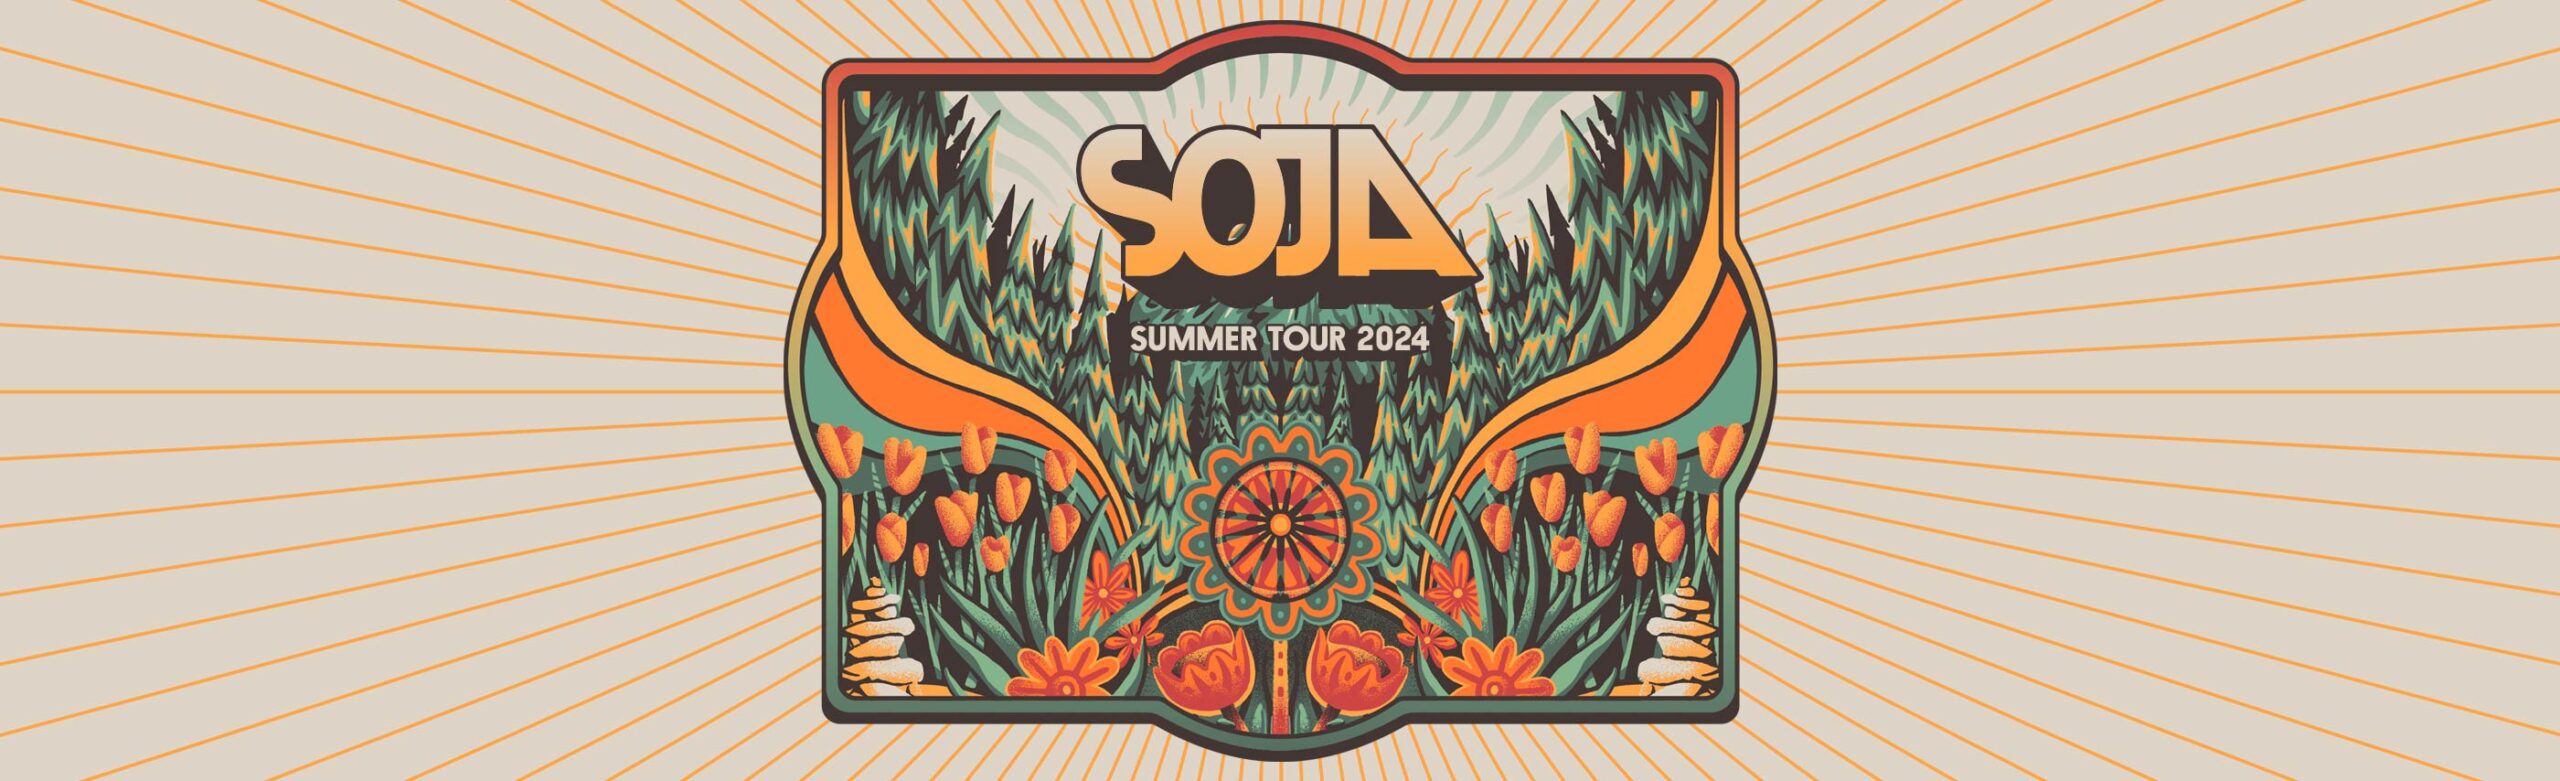 SOJA Announce Concert at The ELM with Arise Roots and Sensamotion Image